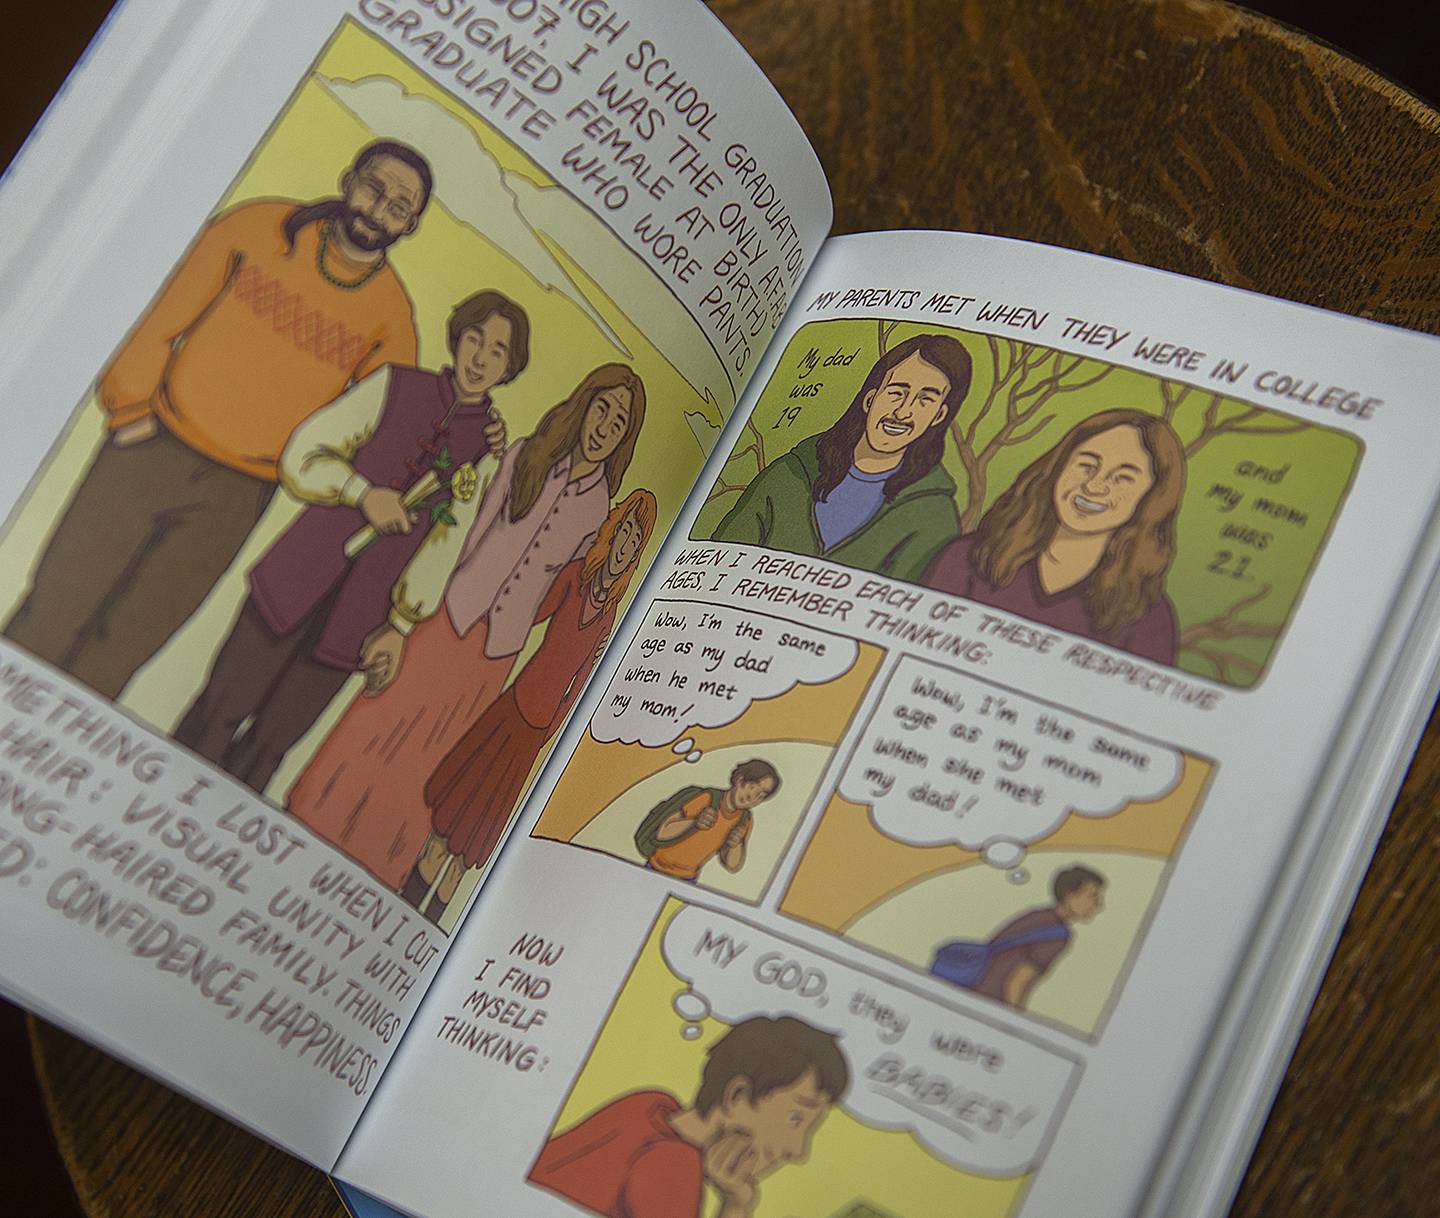 A look inside the art stylings of the graphic novel “Gender Queer.”